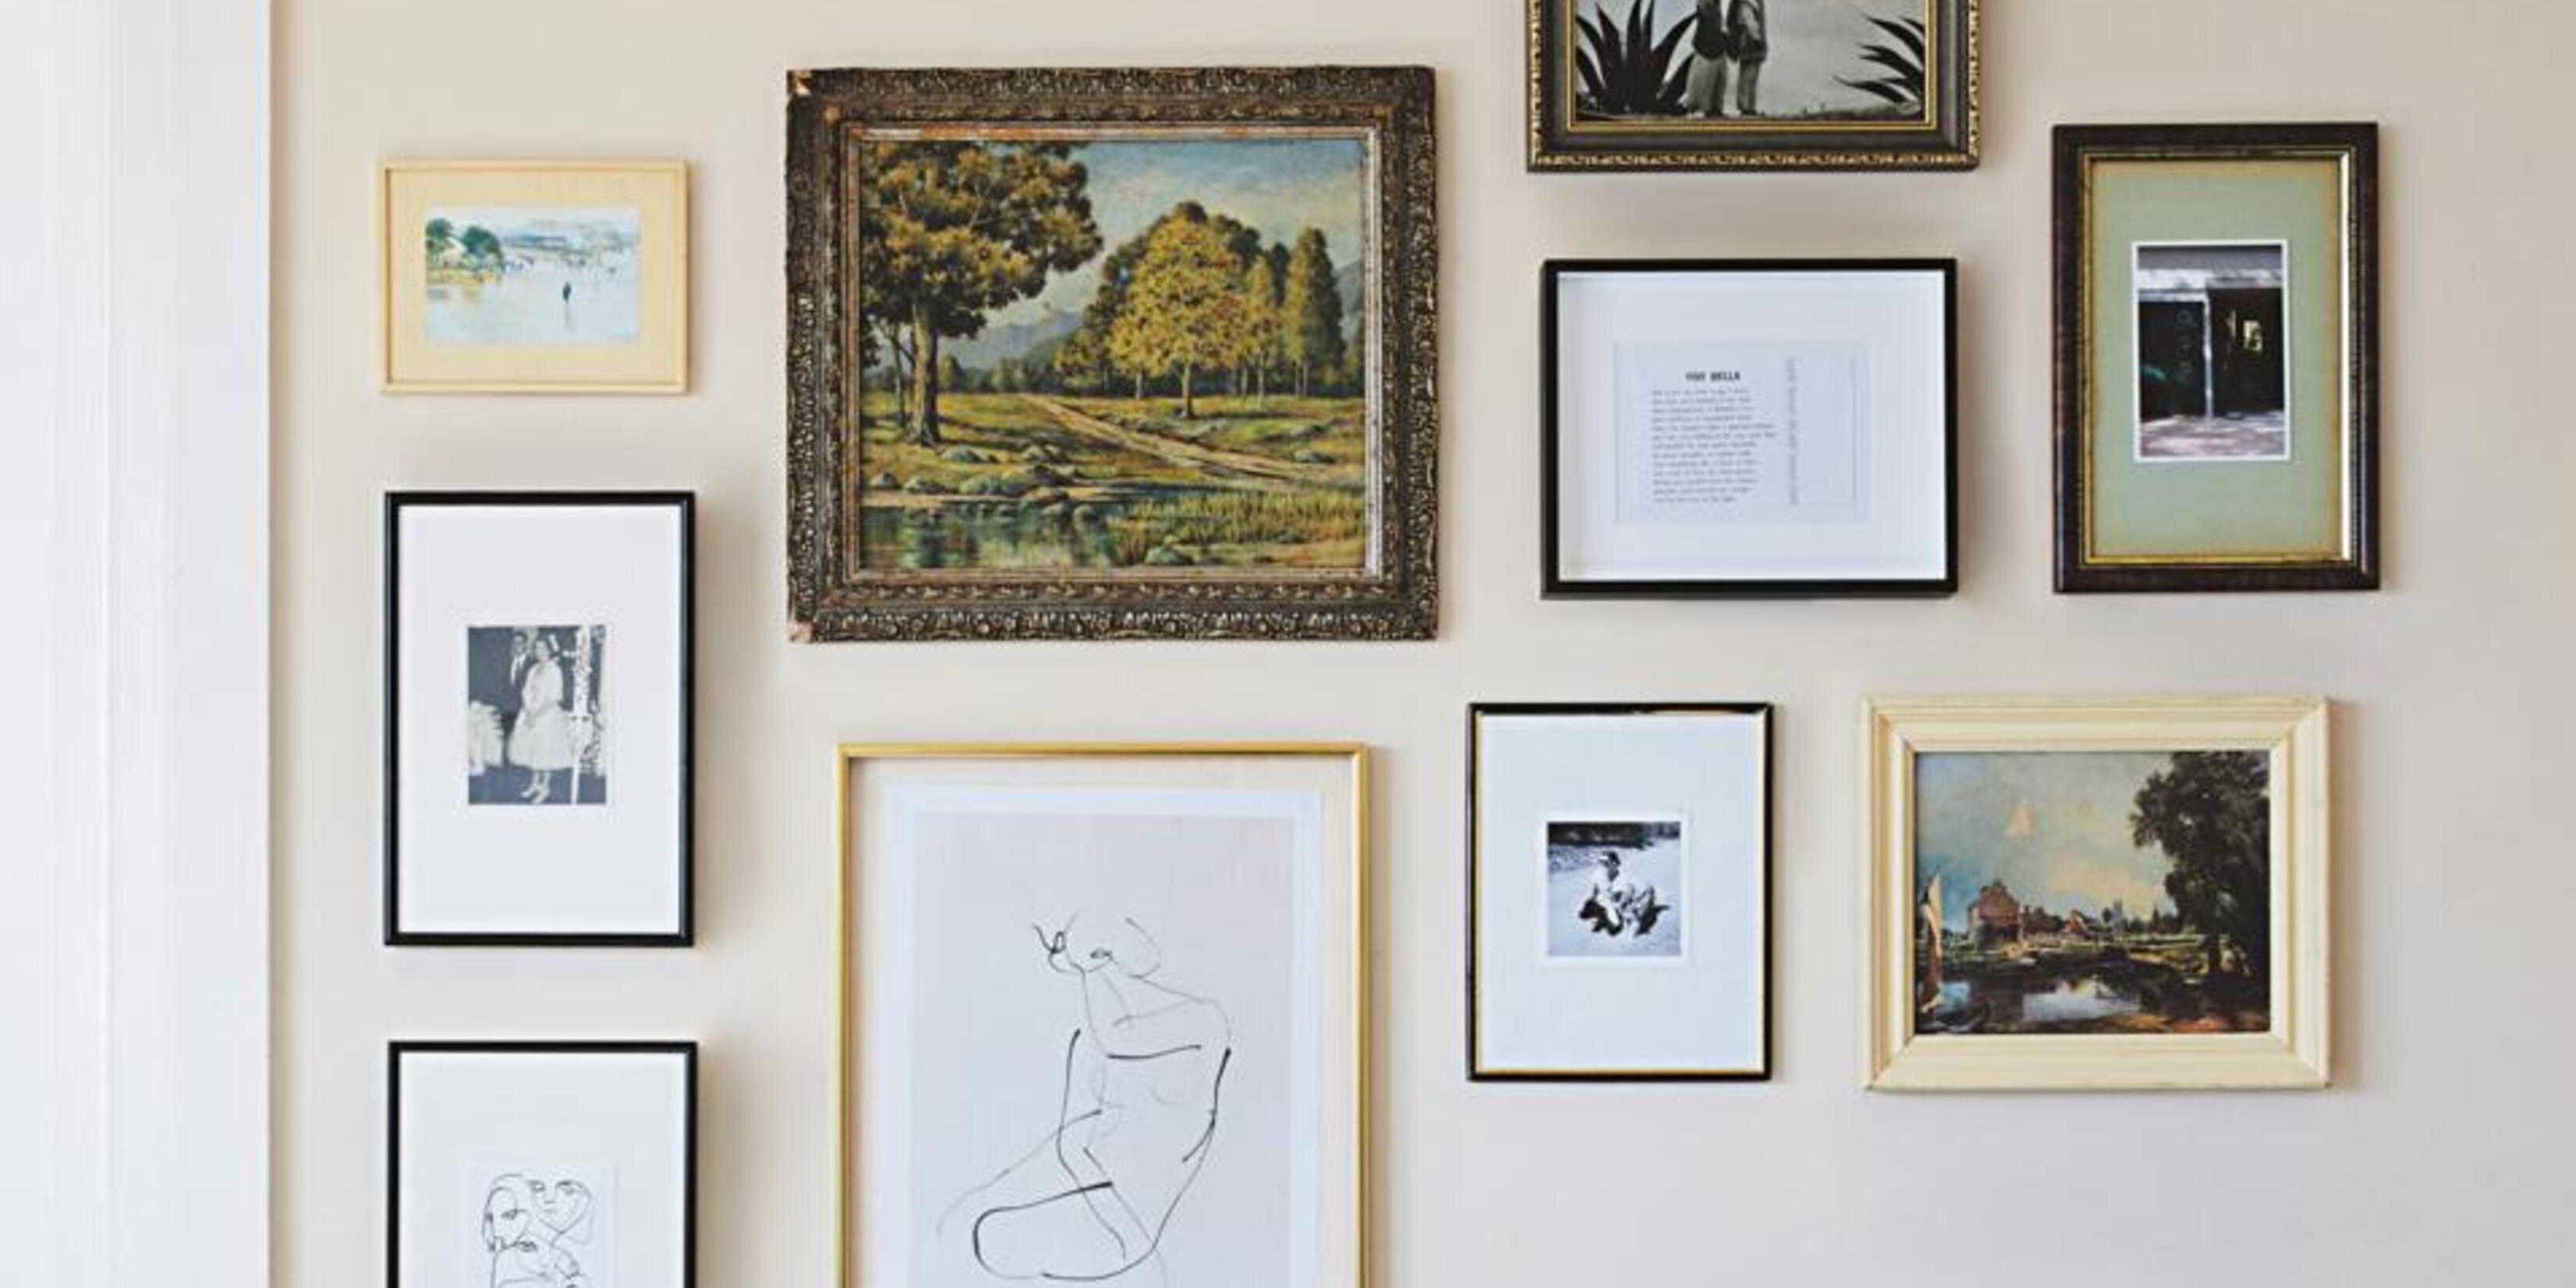 How To Hang Pictures On Your Wall At Home: Pro Tips